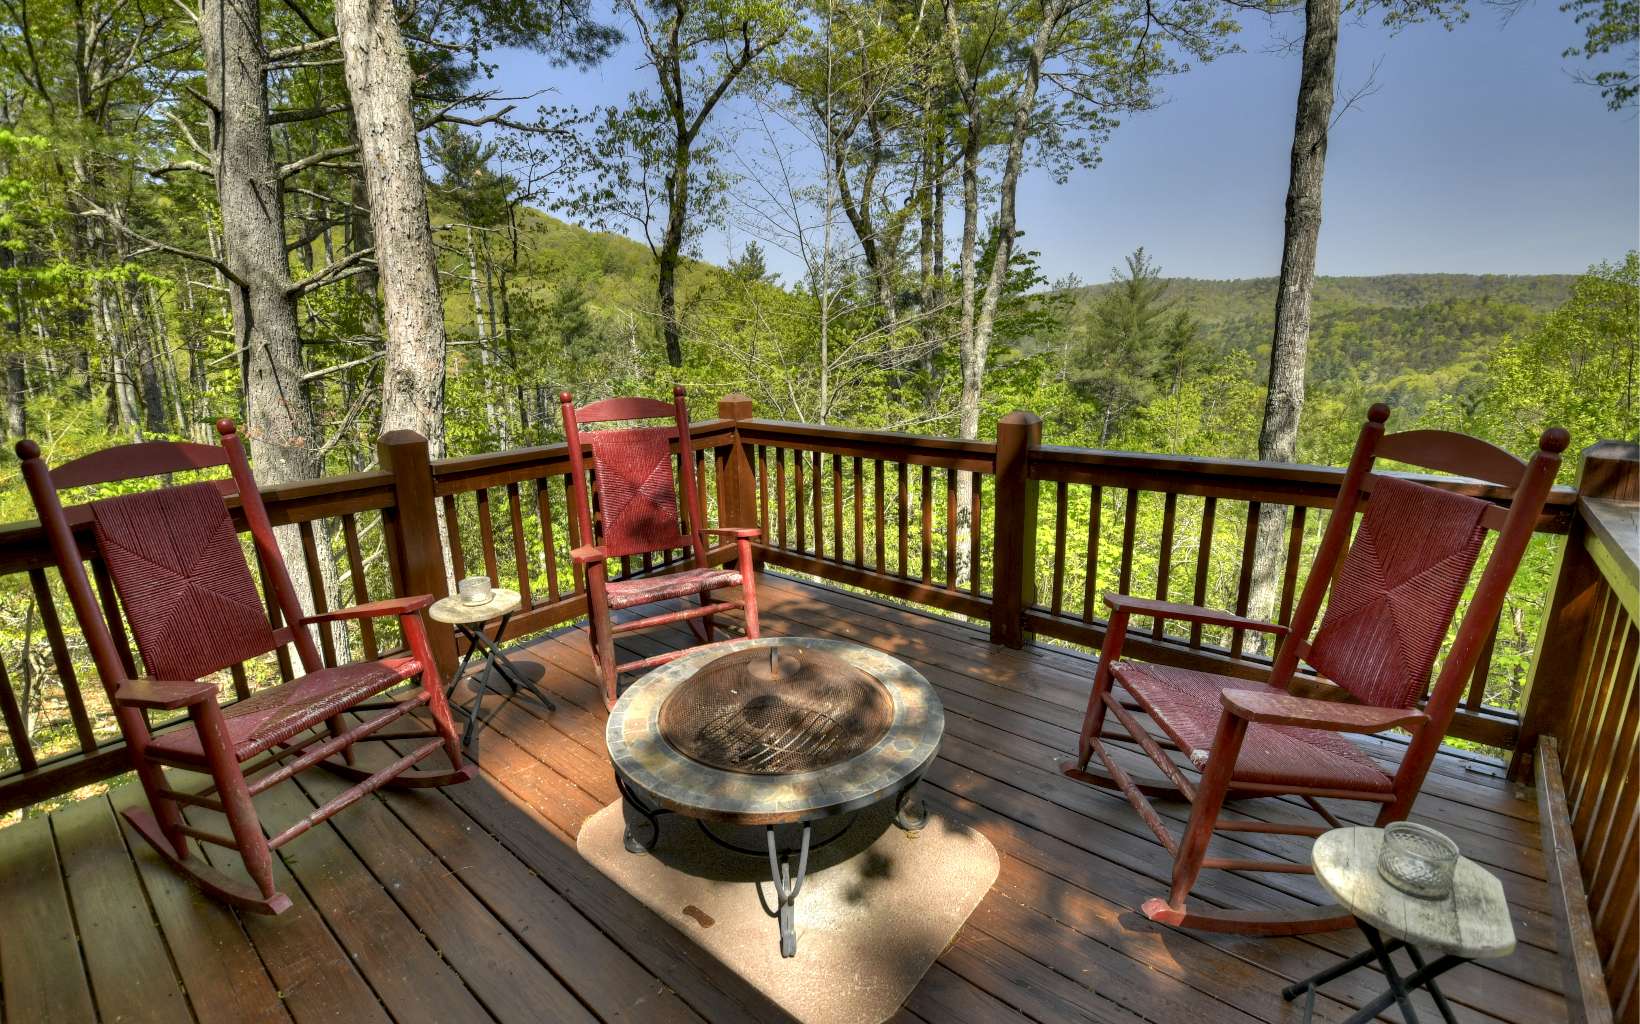 Mountain views, firefly’s, and a "real" log home are just a few of the amazing attributes to enjoy at this Blue Ridge cabin. Located in the sought after Aska adventure area and minutes to the Toccoa River. Cabins next door have sold for over a million. Expansive outdoor living space for entertaining and viewing the sunsets over the mountain. The freshly stained cabin features open concept living w/floor to ceiling stone fireplace and cathedral ceilings. Although it has always been a family retreat, it would be perfect for the vacation rental market.